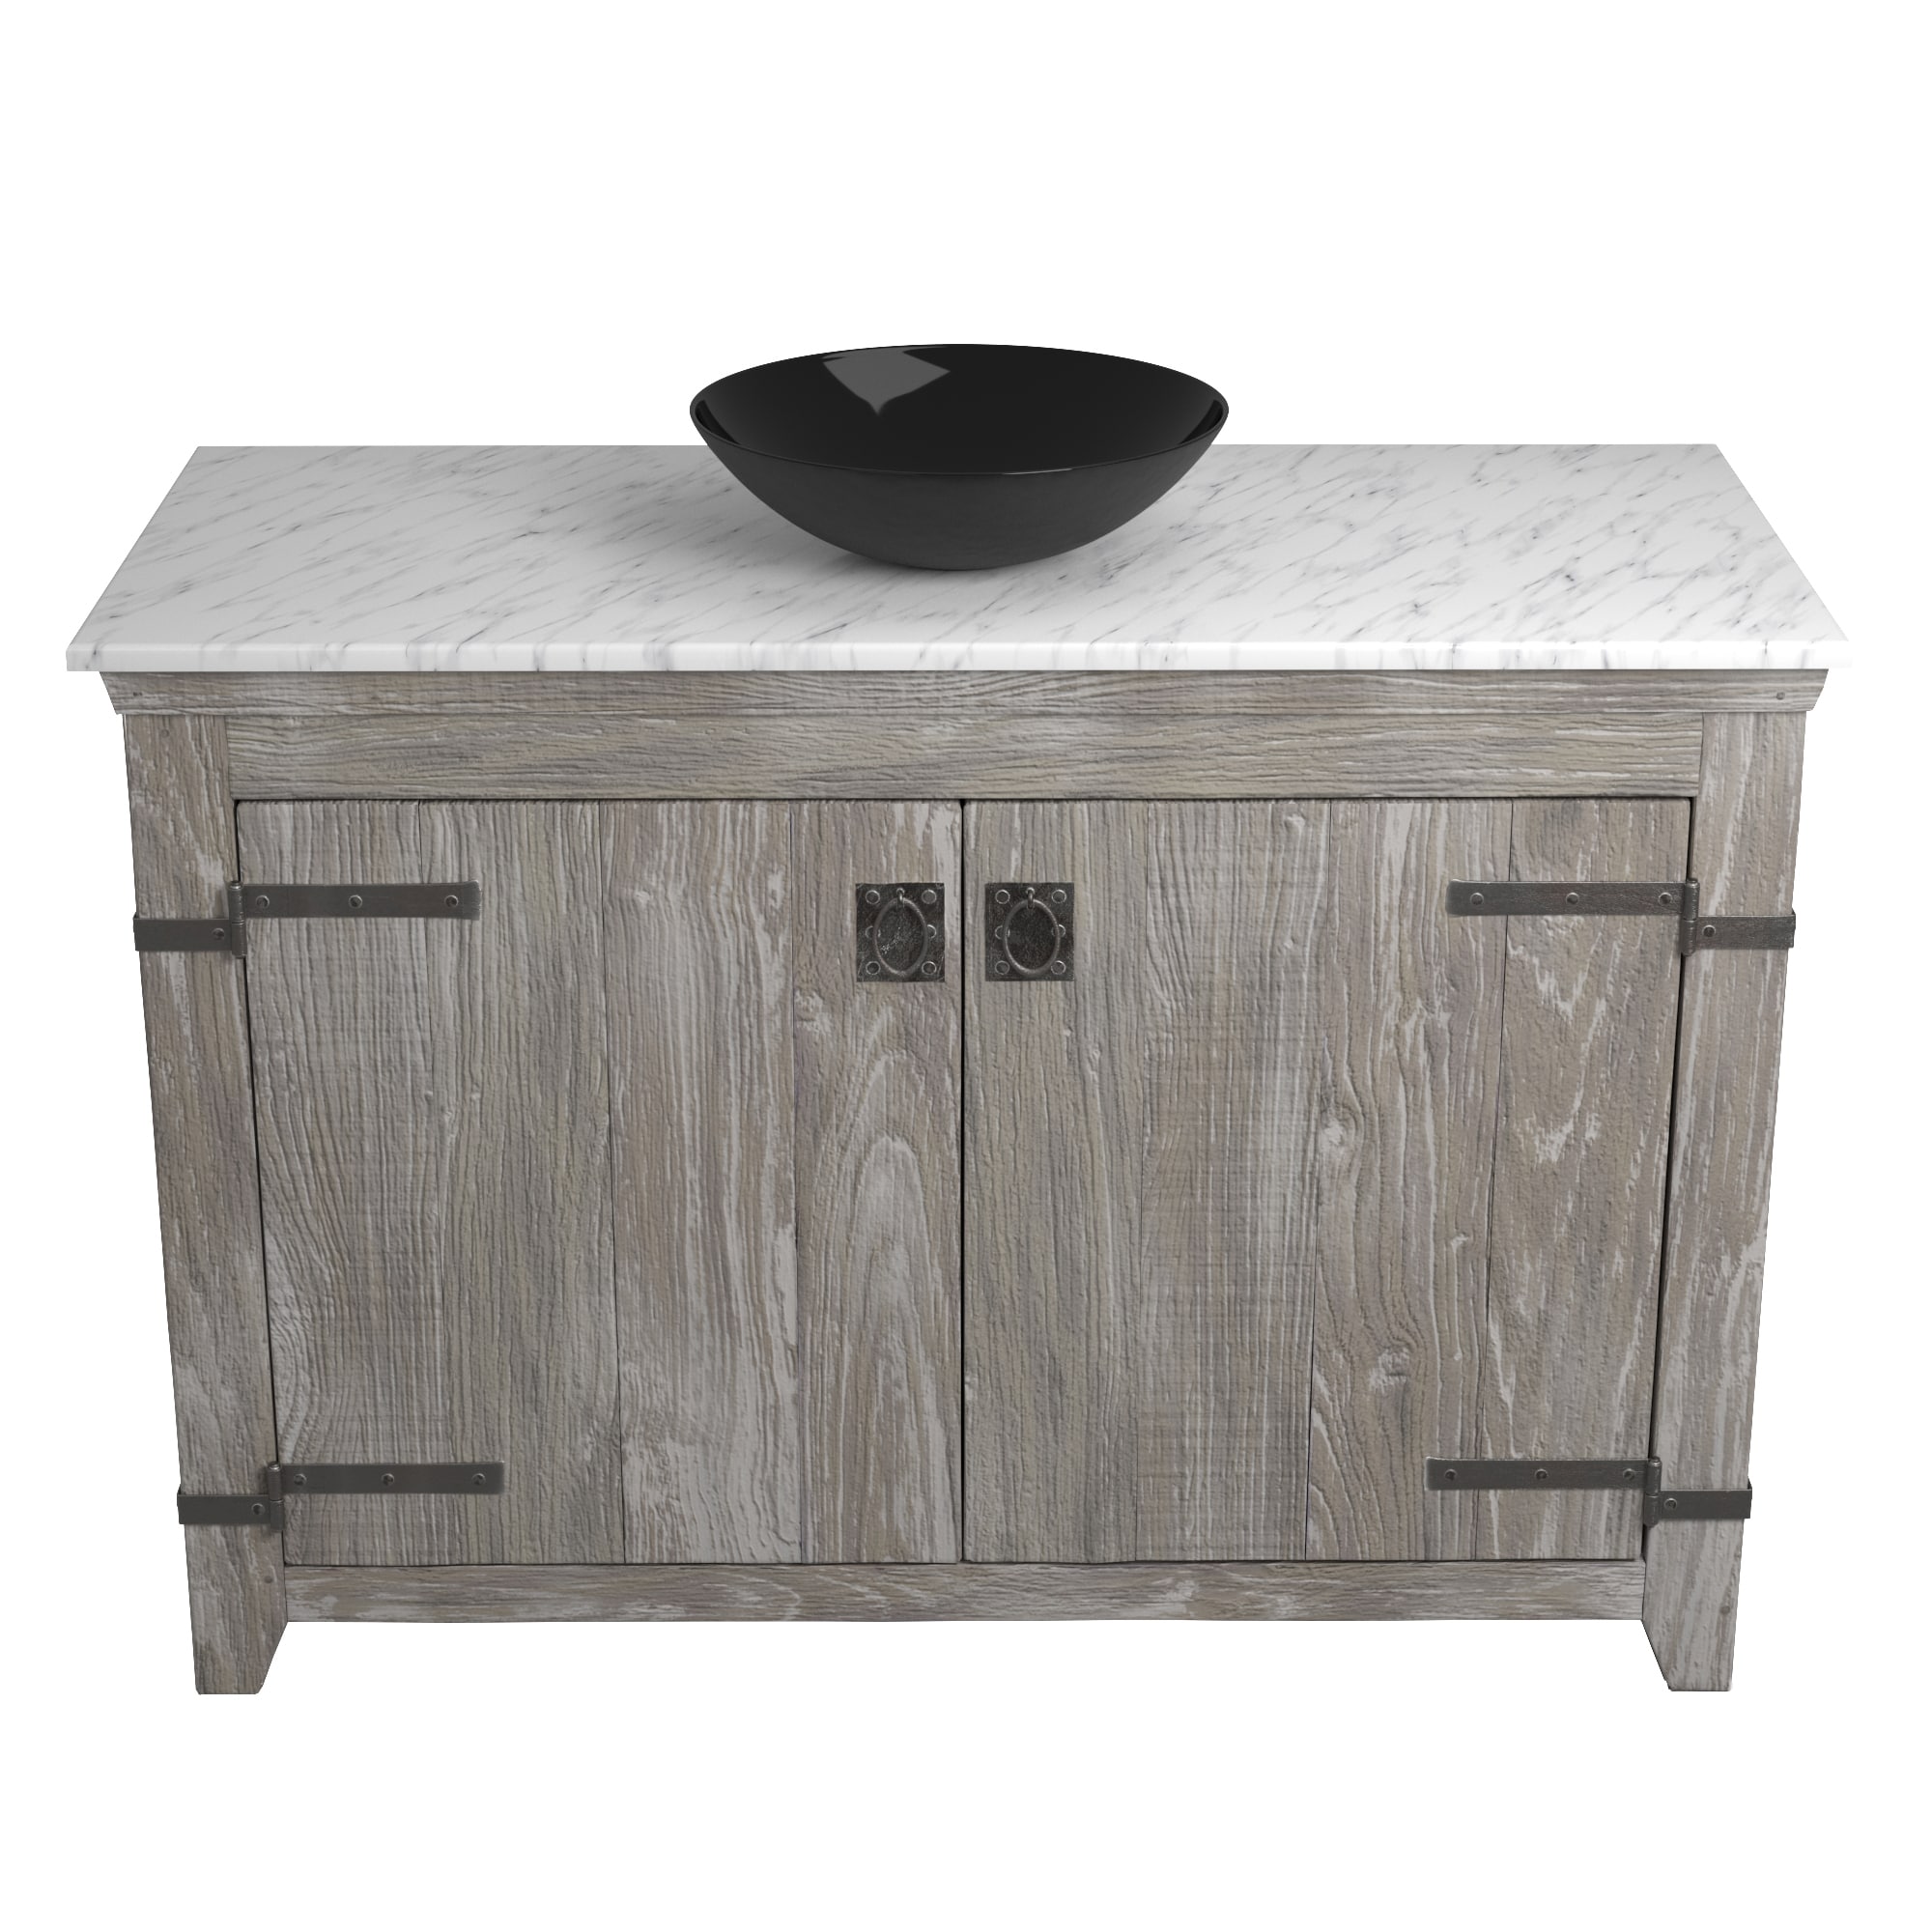 Native Trails 48" Americana Vanity in Driftwood with Carrara Marble Top and Verona in Abyss, Single Faucet Hole, BND48-VB-CT-MG-071